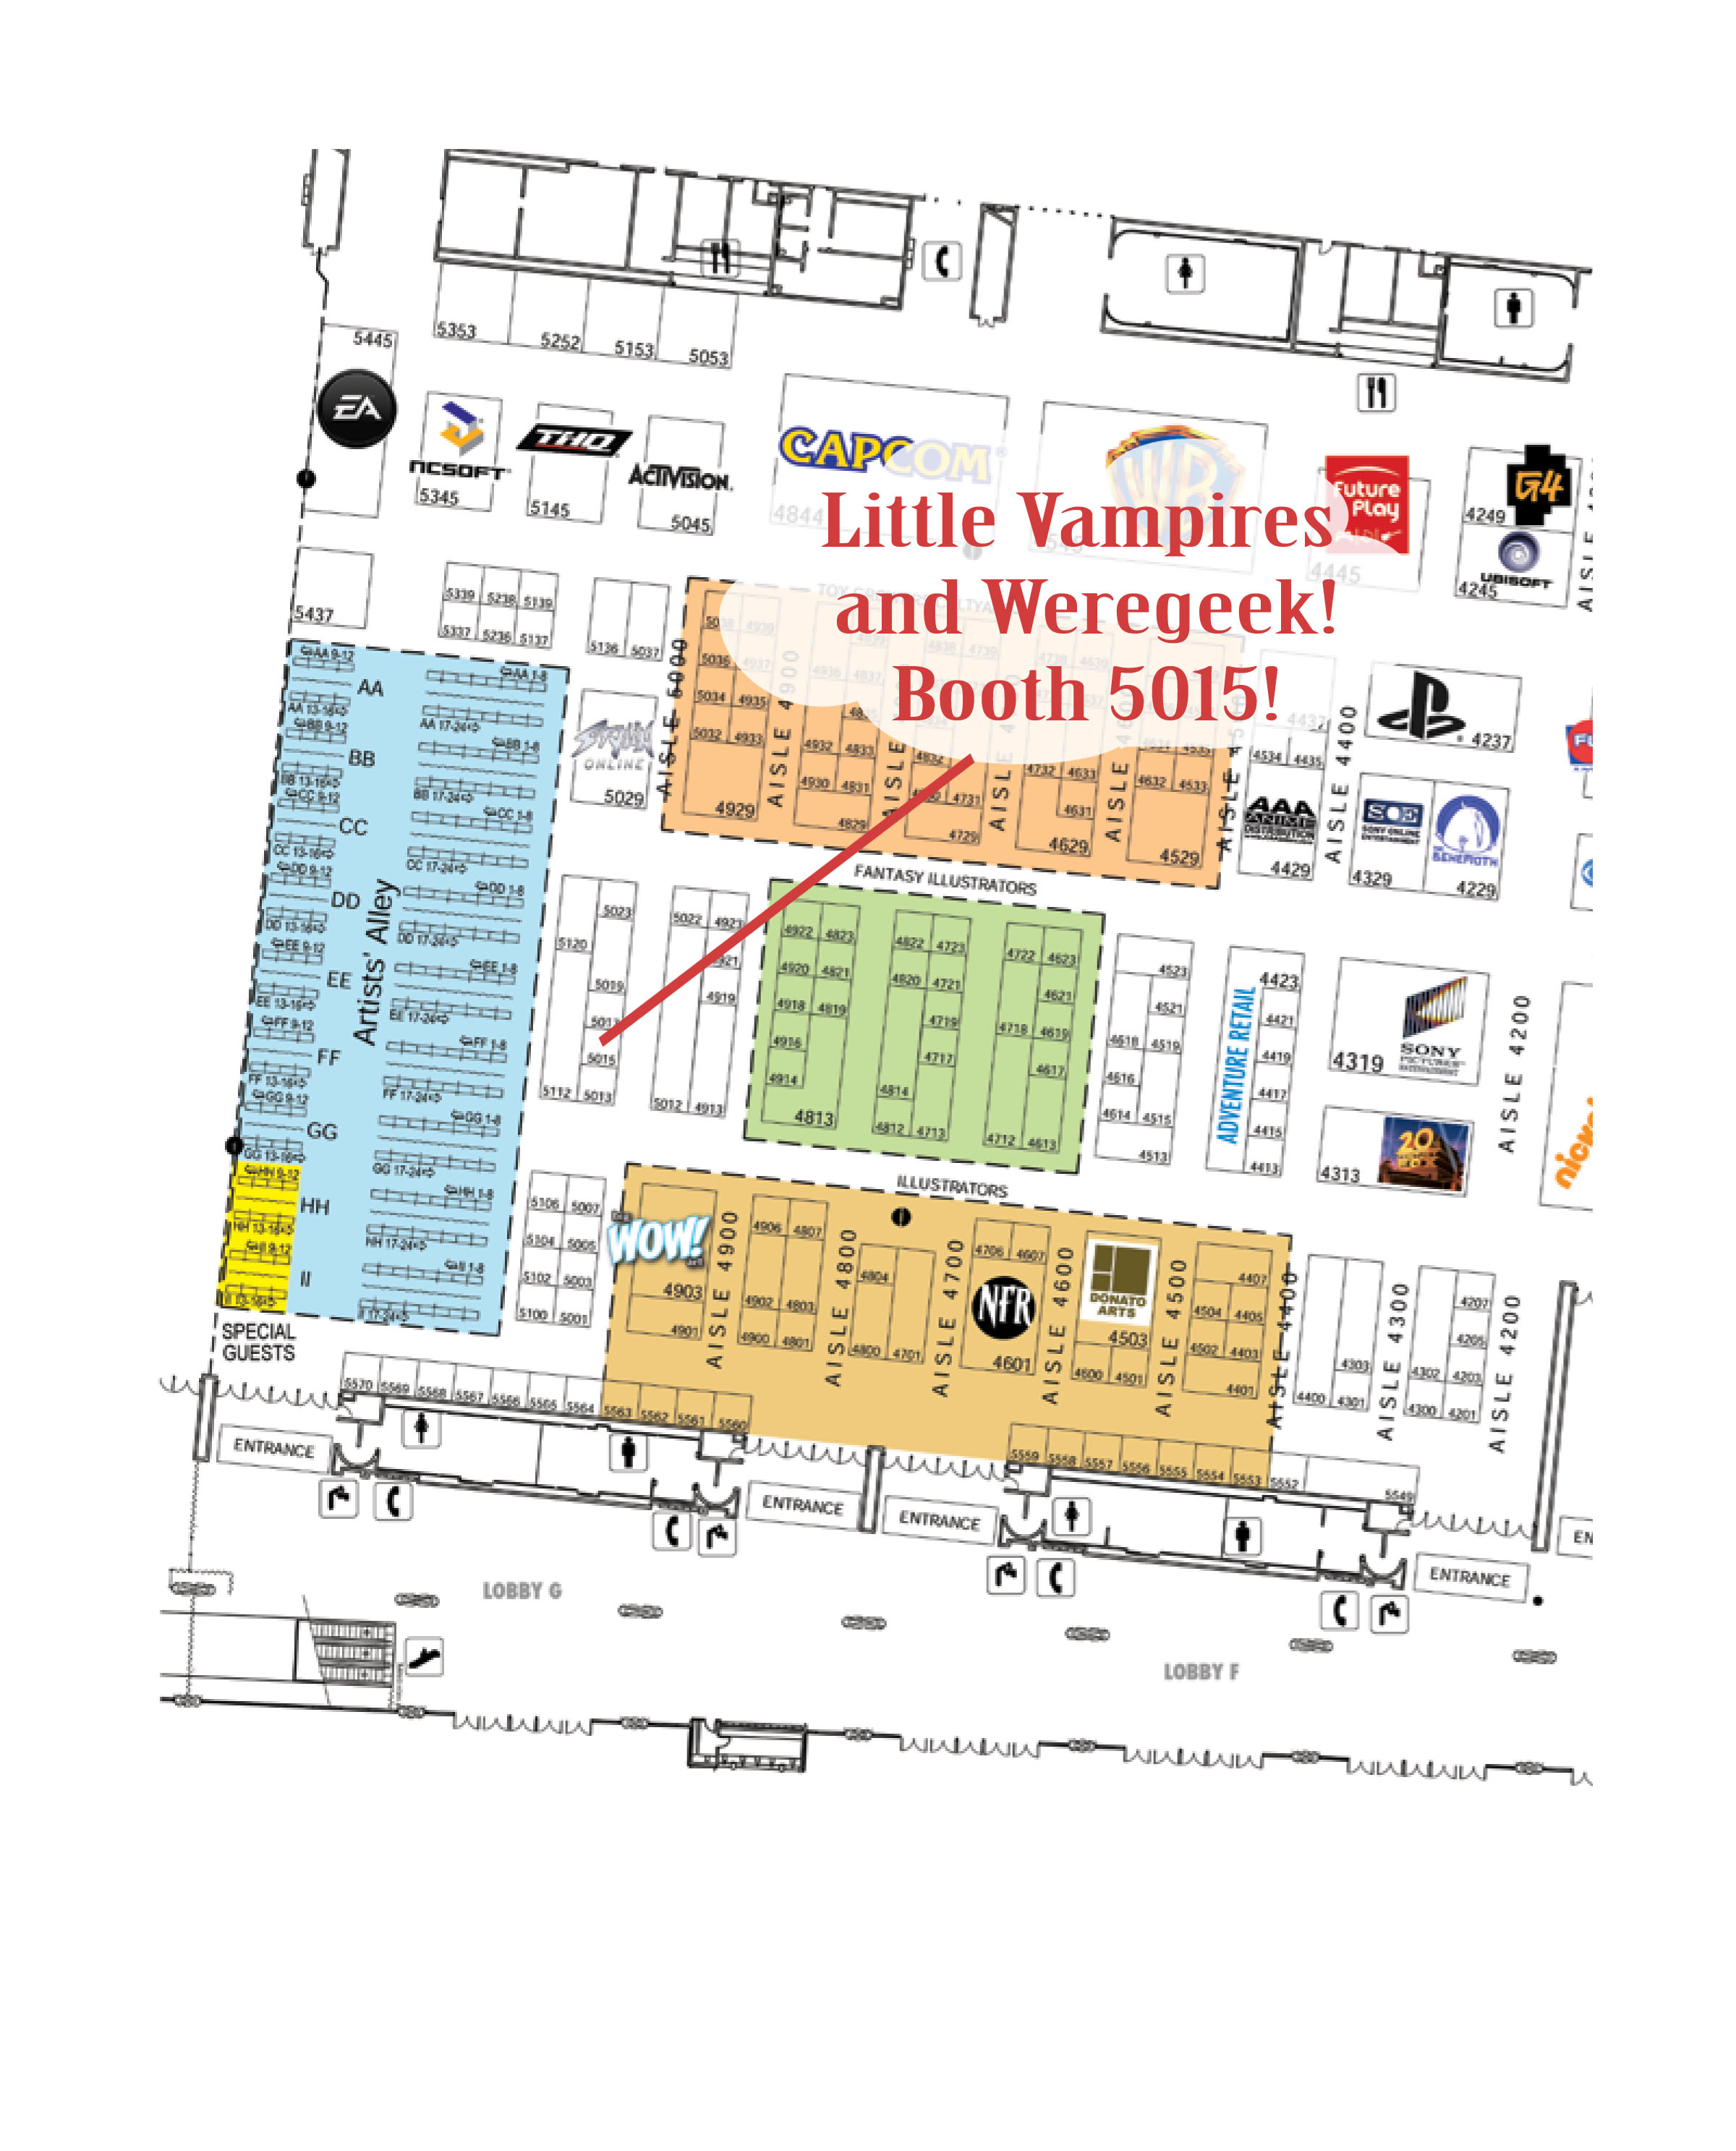 Map of San Diego Comic-Con 2010 Exhibitor Hall with booth 5015 highlighted